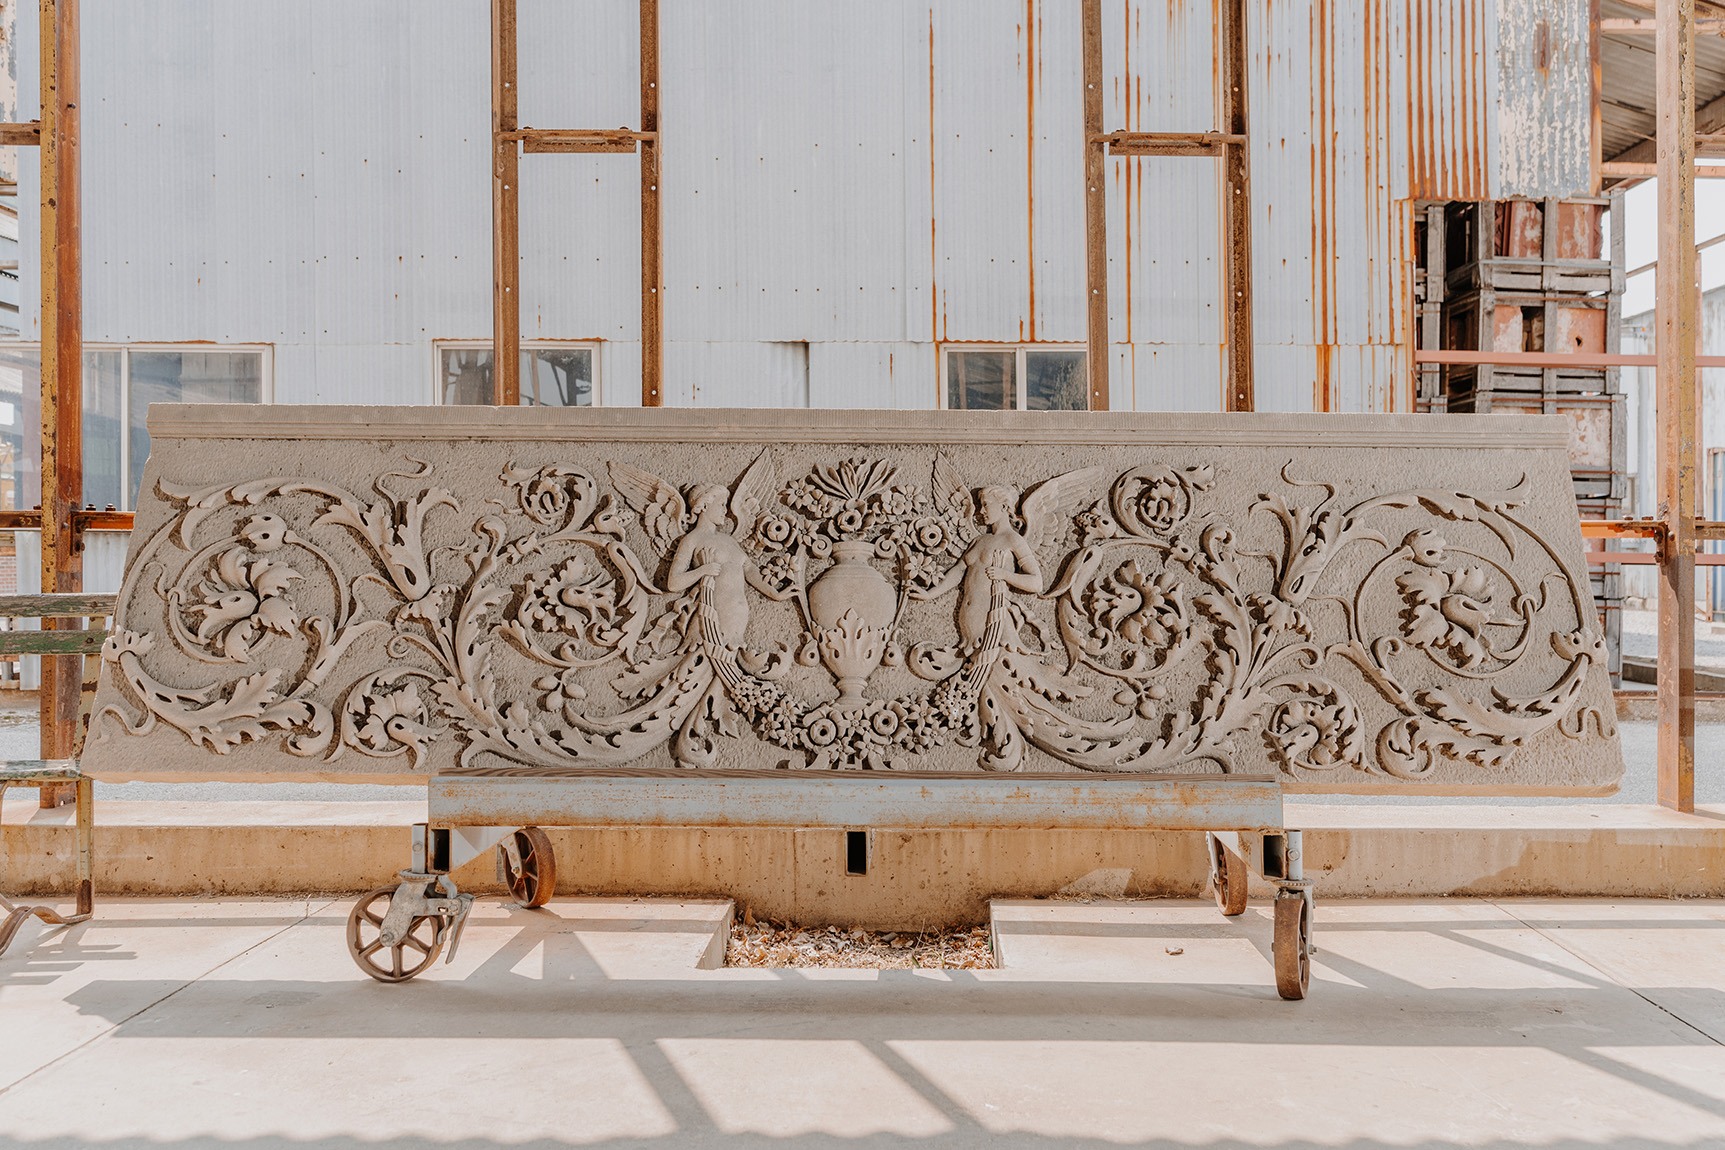 Architectural relief panel made of limestone.